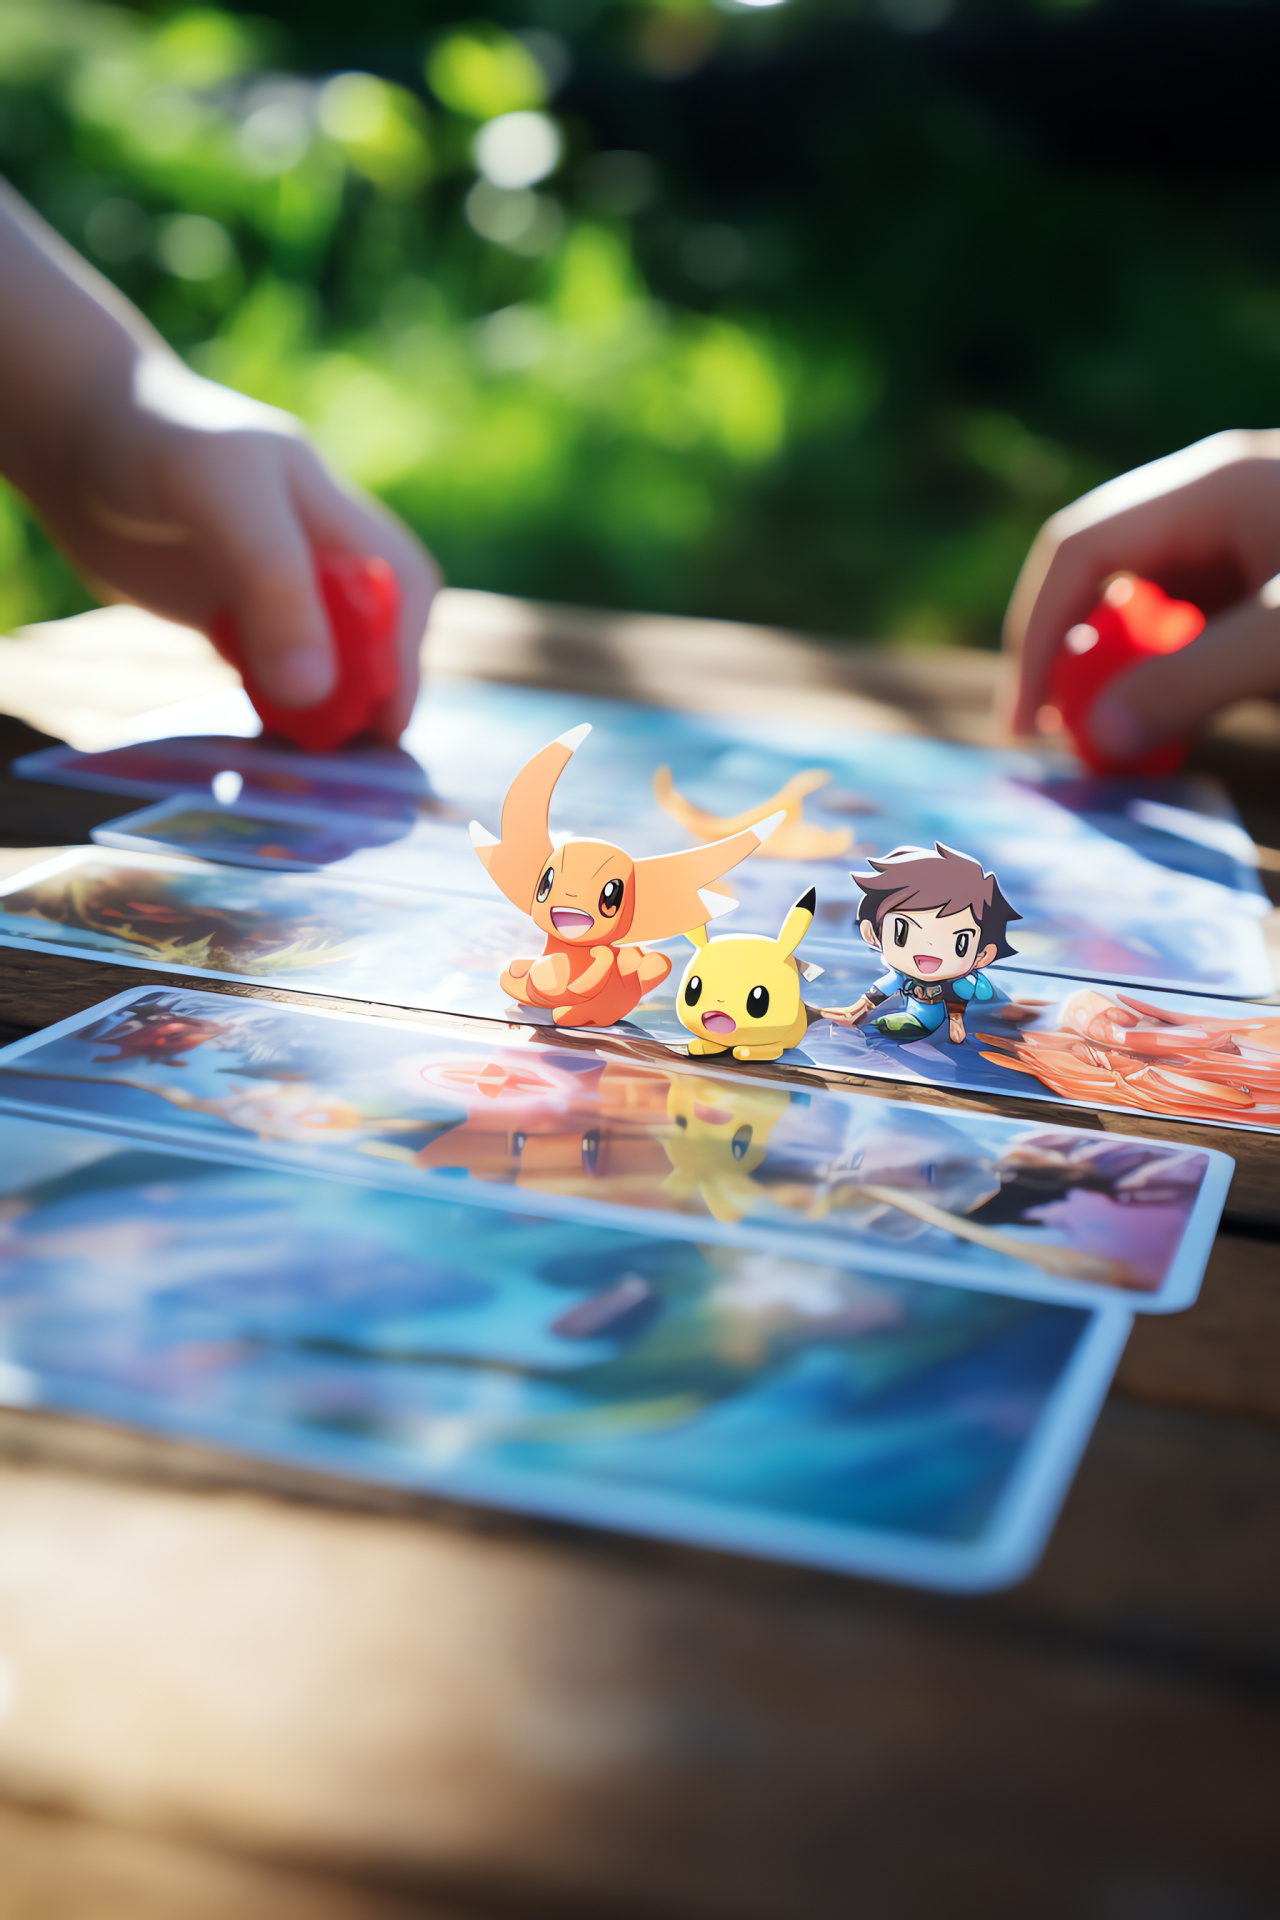 Pokemon Trading Card Game, Juvenile players, Open-air leisure, Wooden luncheon bench, Strategic play, HD Phone Wallpaper